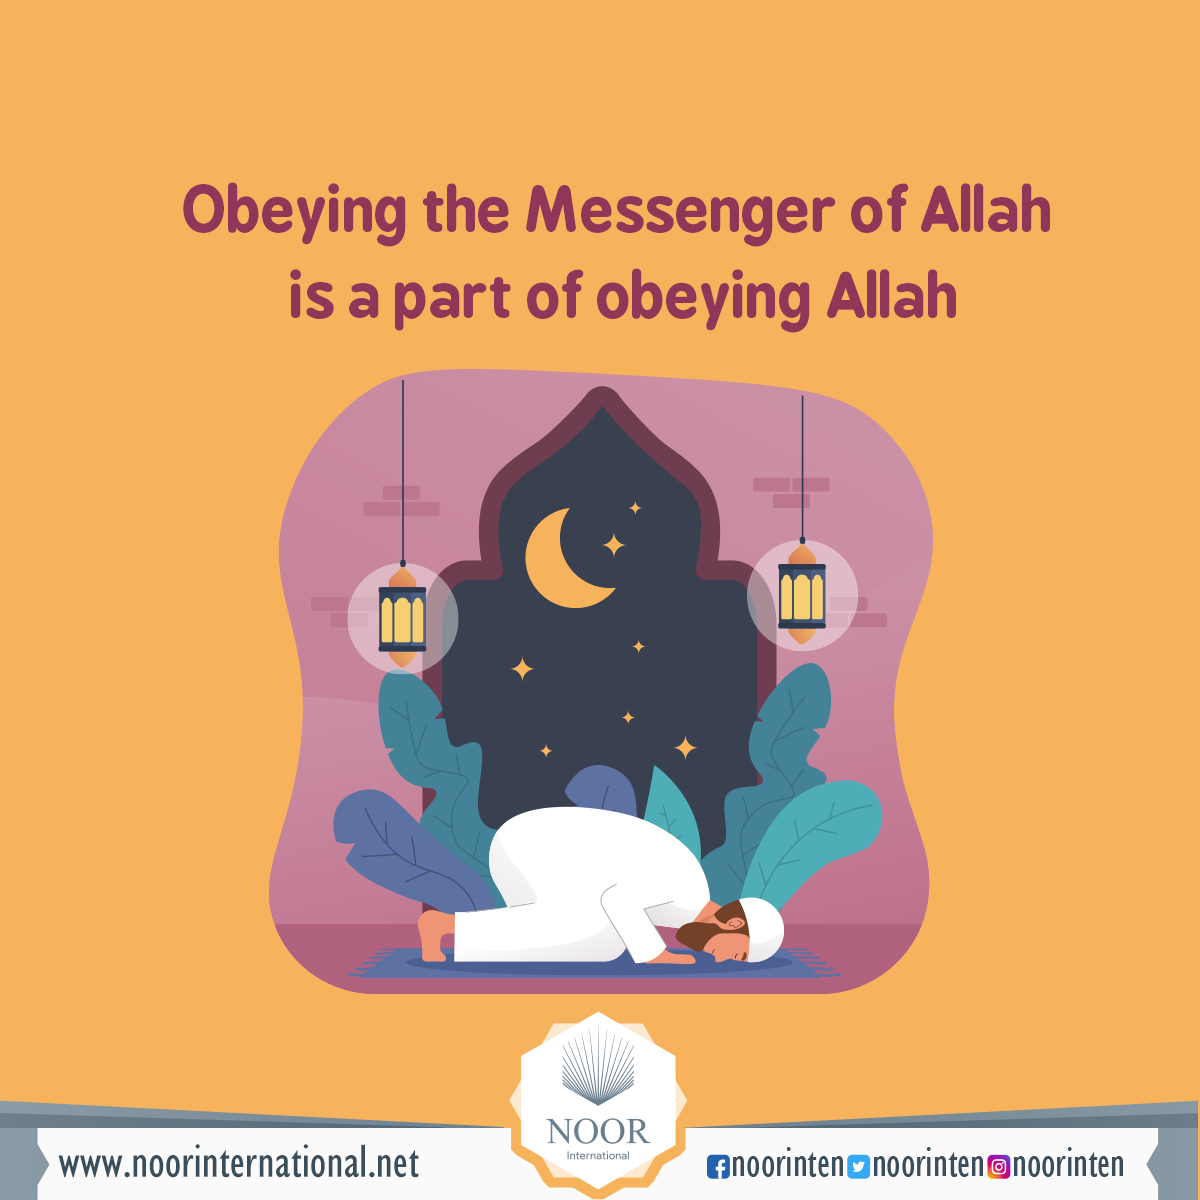 Obeying the Messenger of Allah is a part of obeying Allah